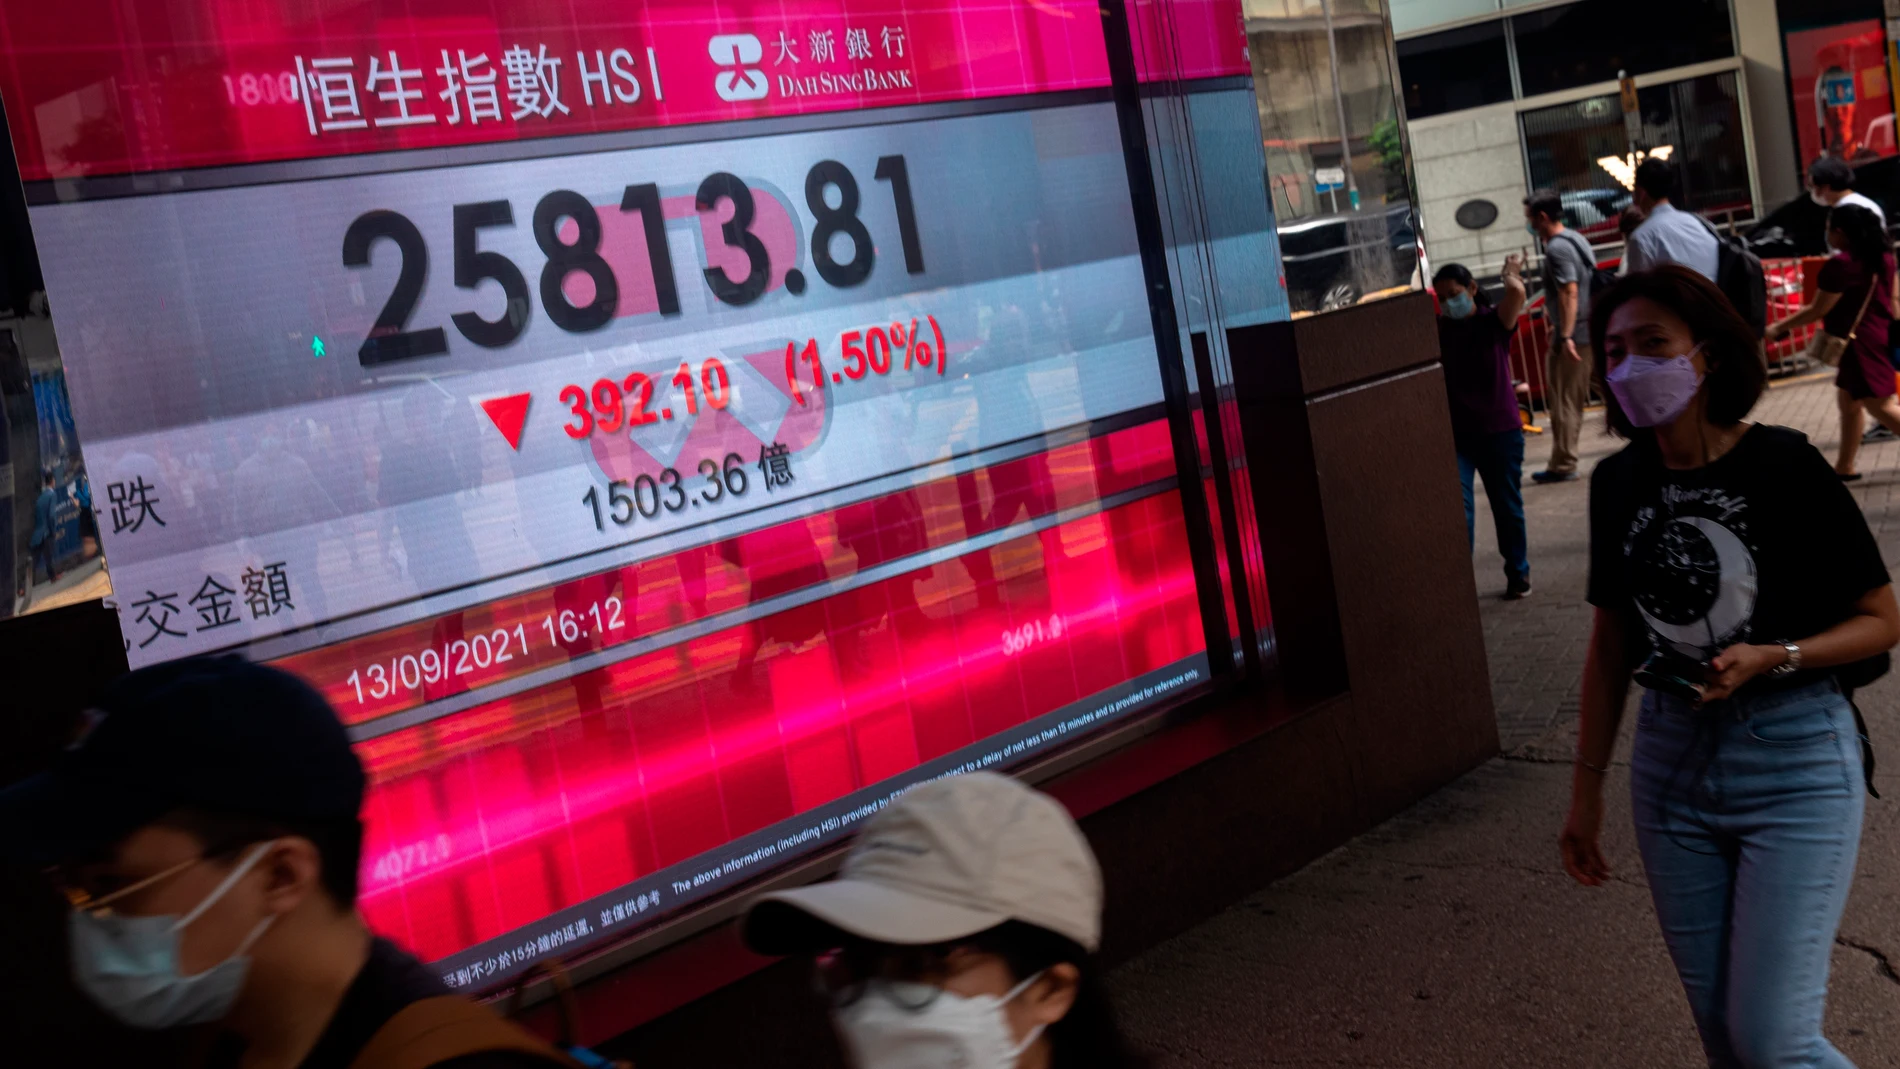 Hong Kong (China), 13/09/2021.- Pedestrians walk past an electronic billboard displaying information on the Hang Seng Index (HSI) in Hong Kong, China, 13 September 2021. The HSI fell 1.5 percent, or 392 points, to 25,813. EFE/EPA/JEROME FAVRE